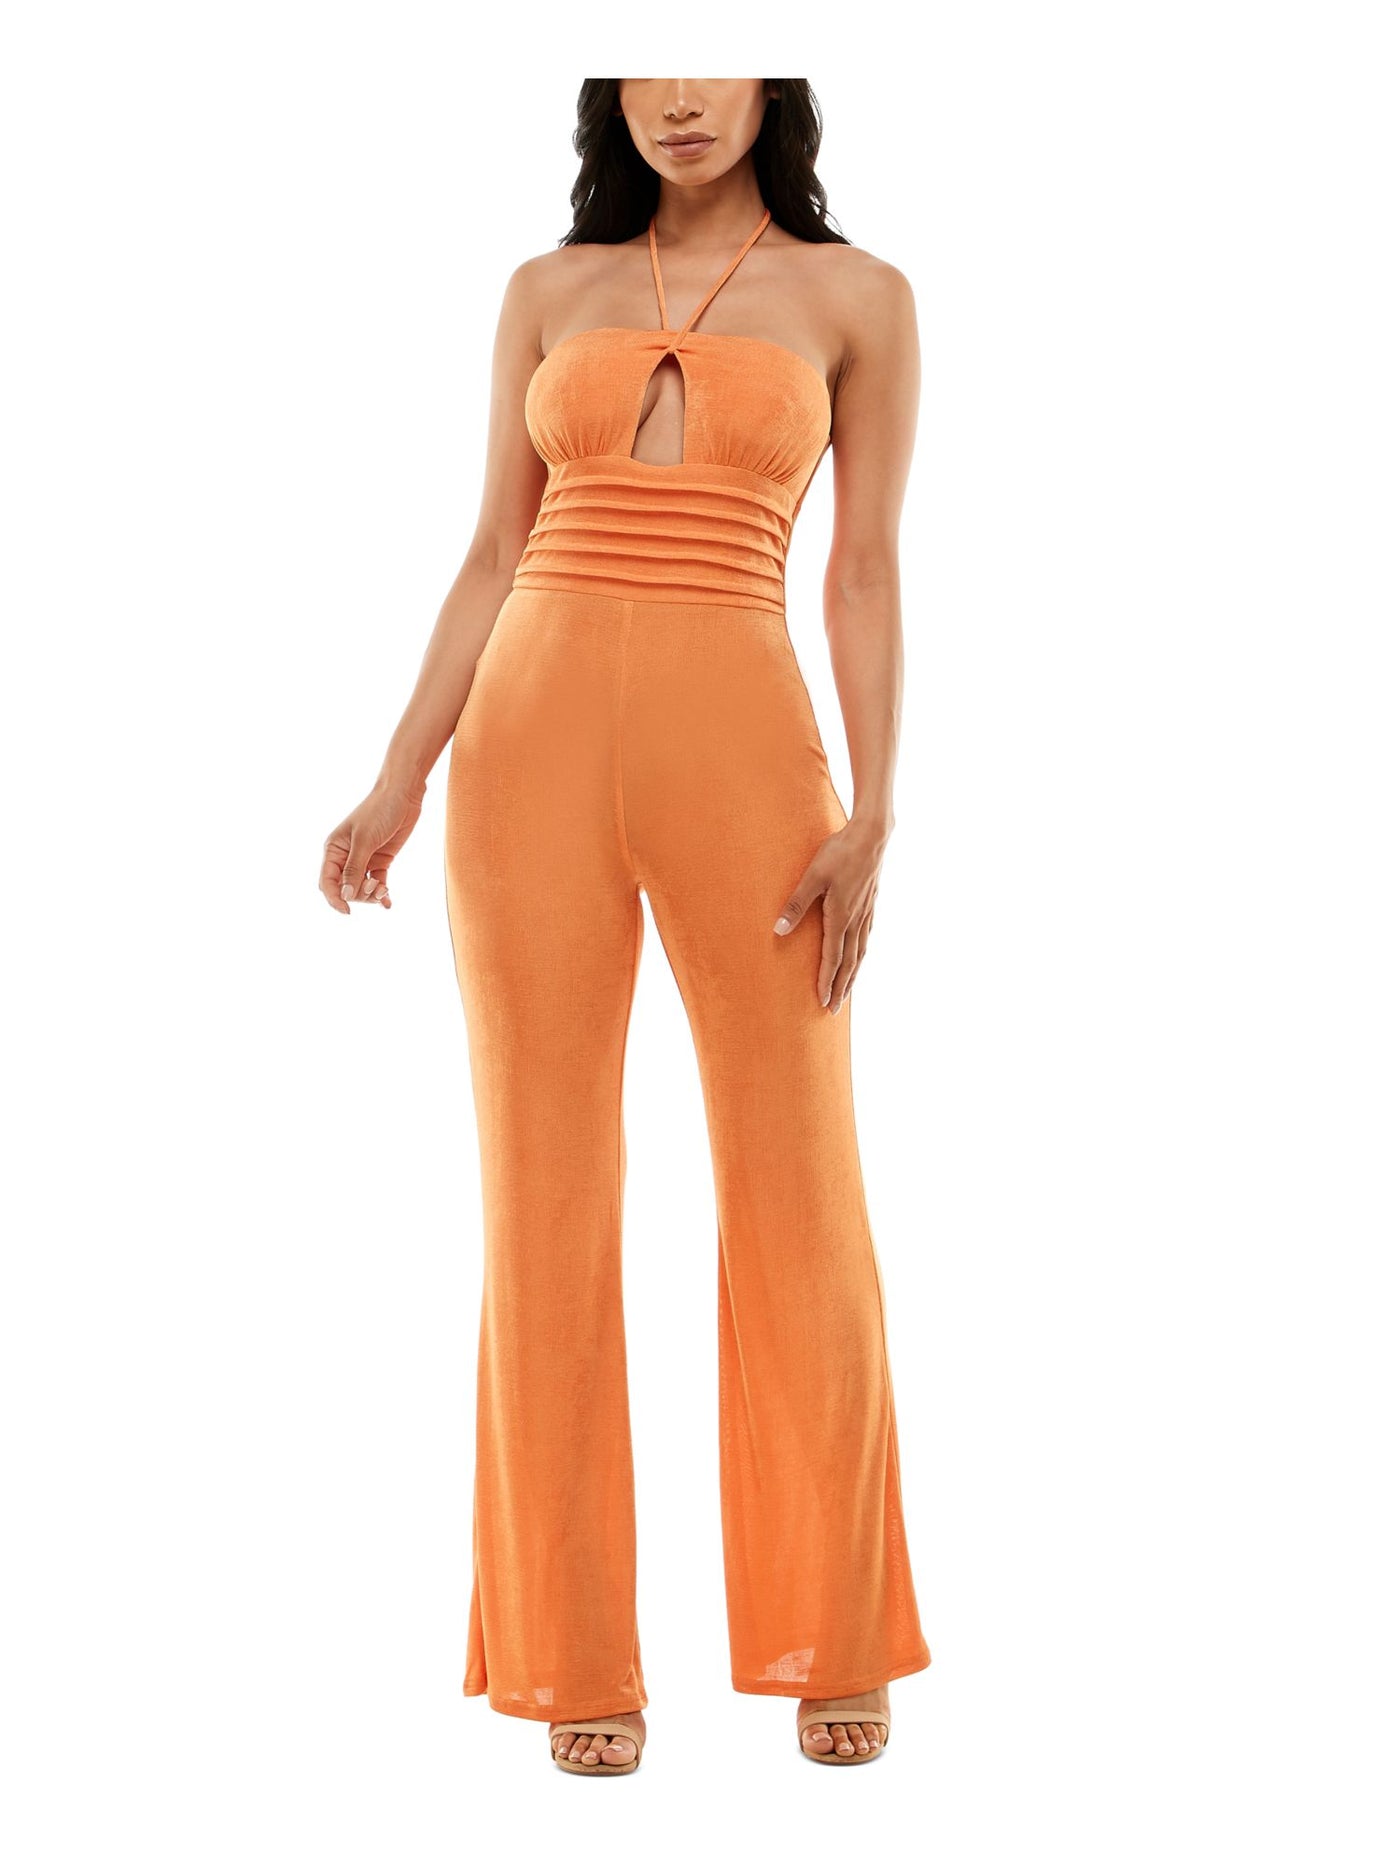 BEBE Womens Orange Cut Out Zippered Pleated Tie Spaghetti Strap Halter Cocktail Flare Jumpsuit M